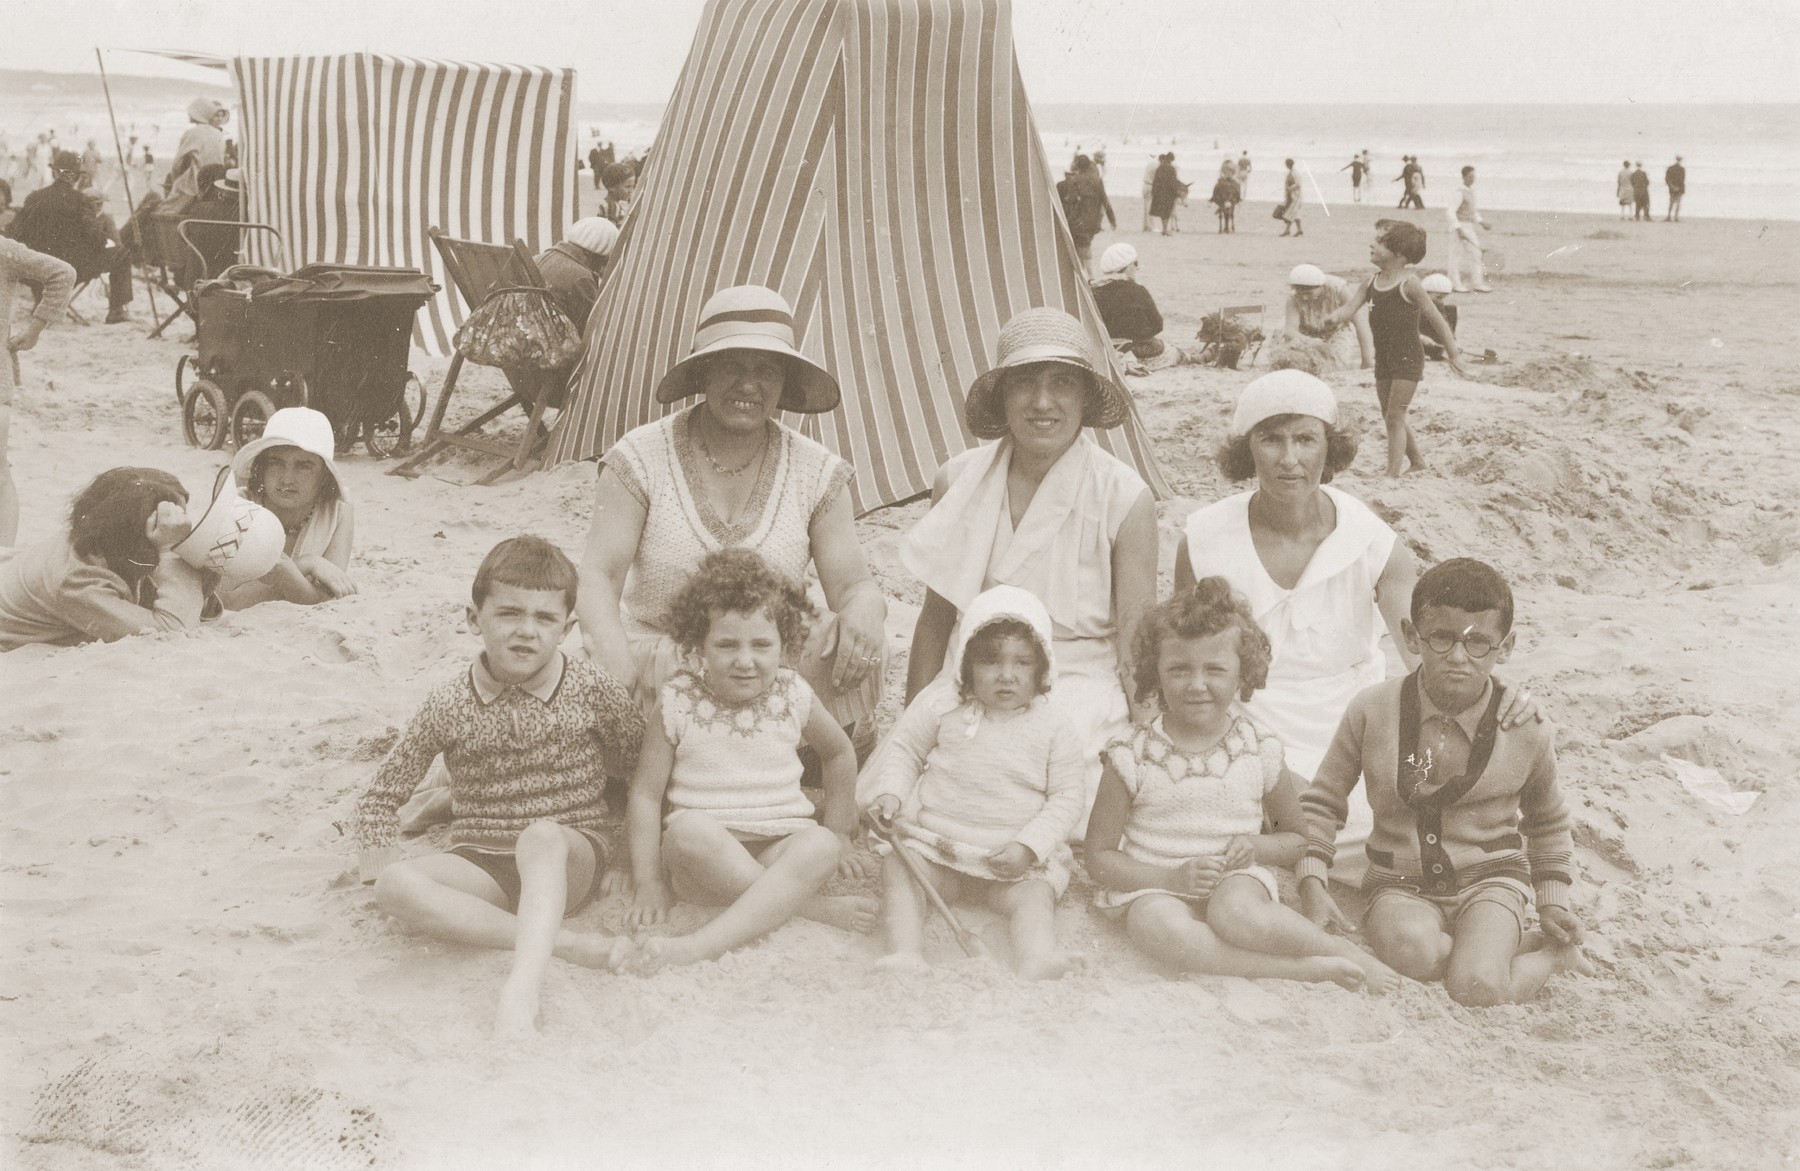 The Rubinsztejn family poses in front of a cabana on a beach in France. 

Pictured are Denise Grynberg, Eveline Grynberg, Dworja Rubinsztejn, Armand Rubinsztejn, and Chaya Grynberg Rubinsztejn.